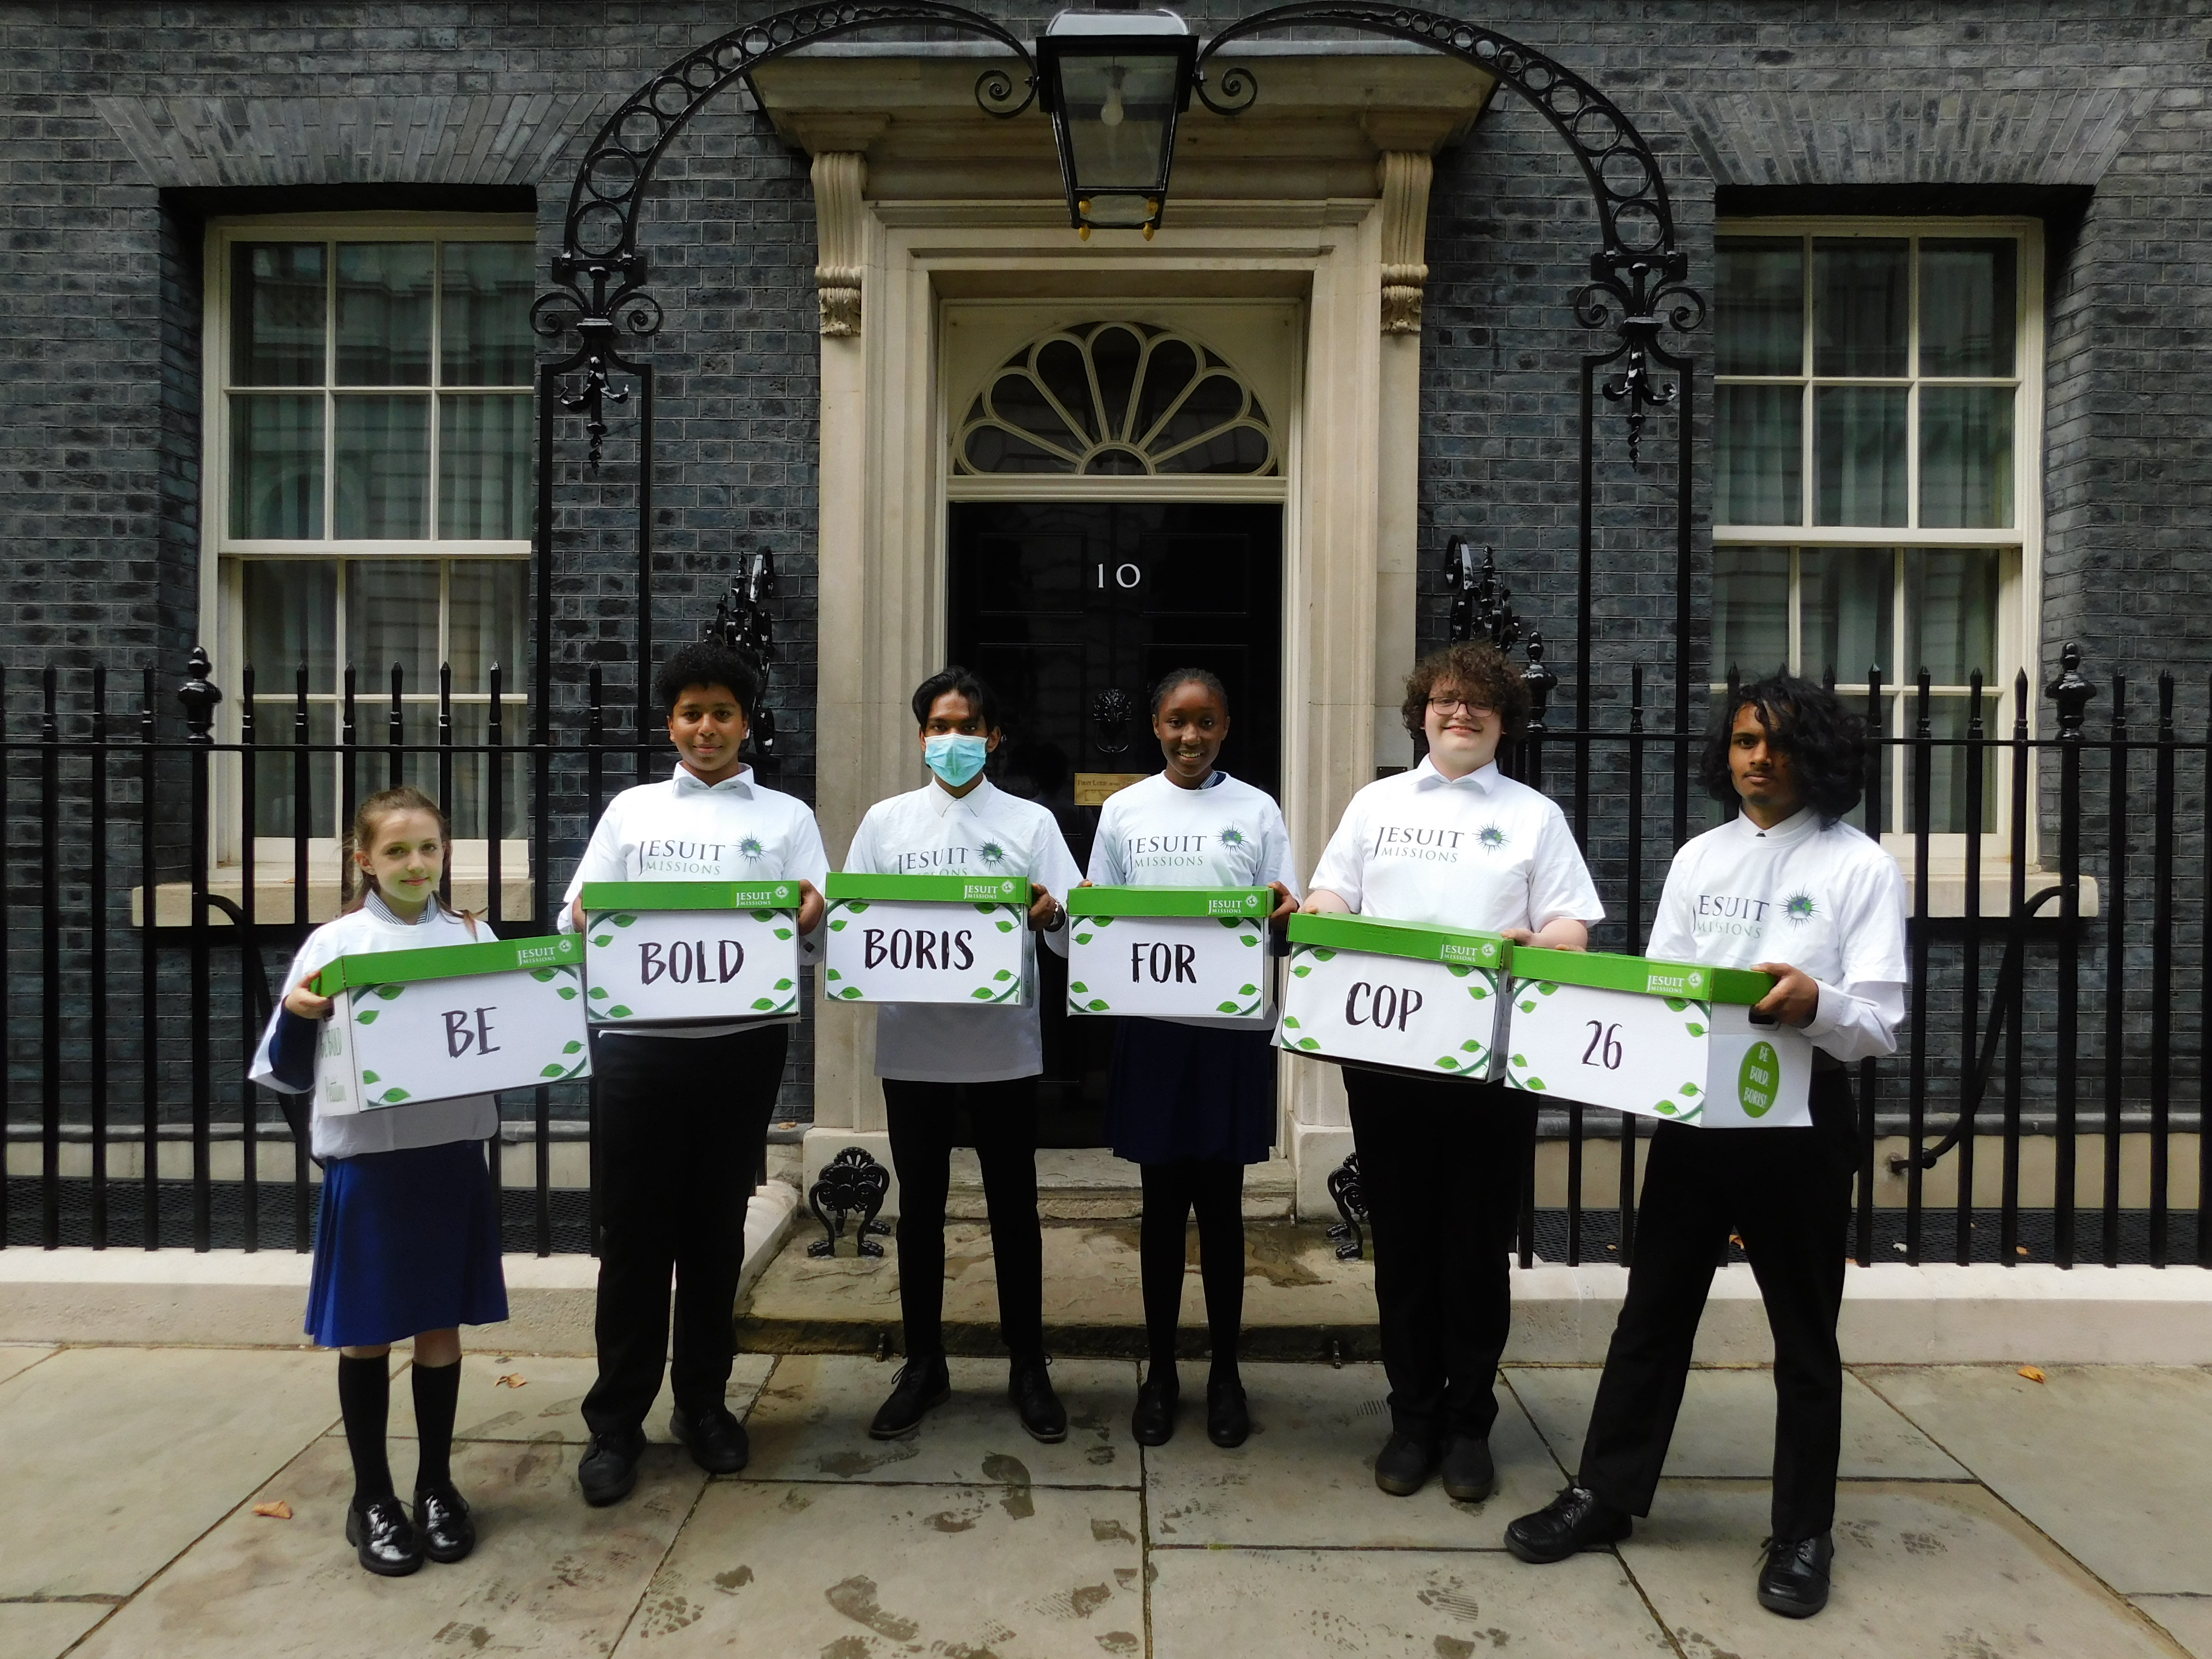 Catholic school pupils call on Prime Minister to face up to climate crisis